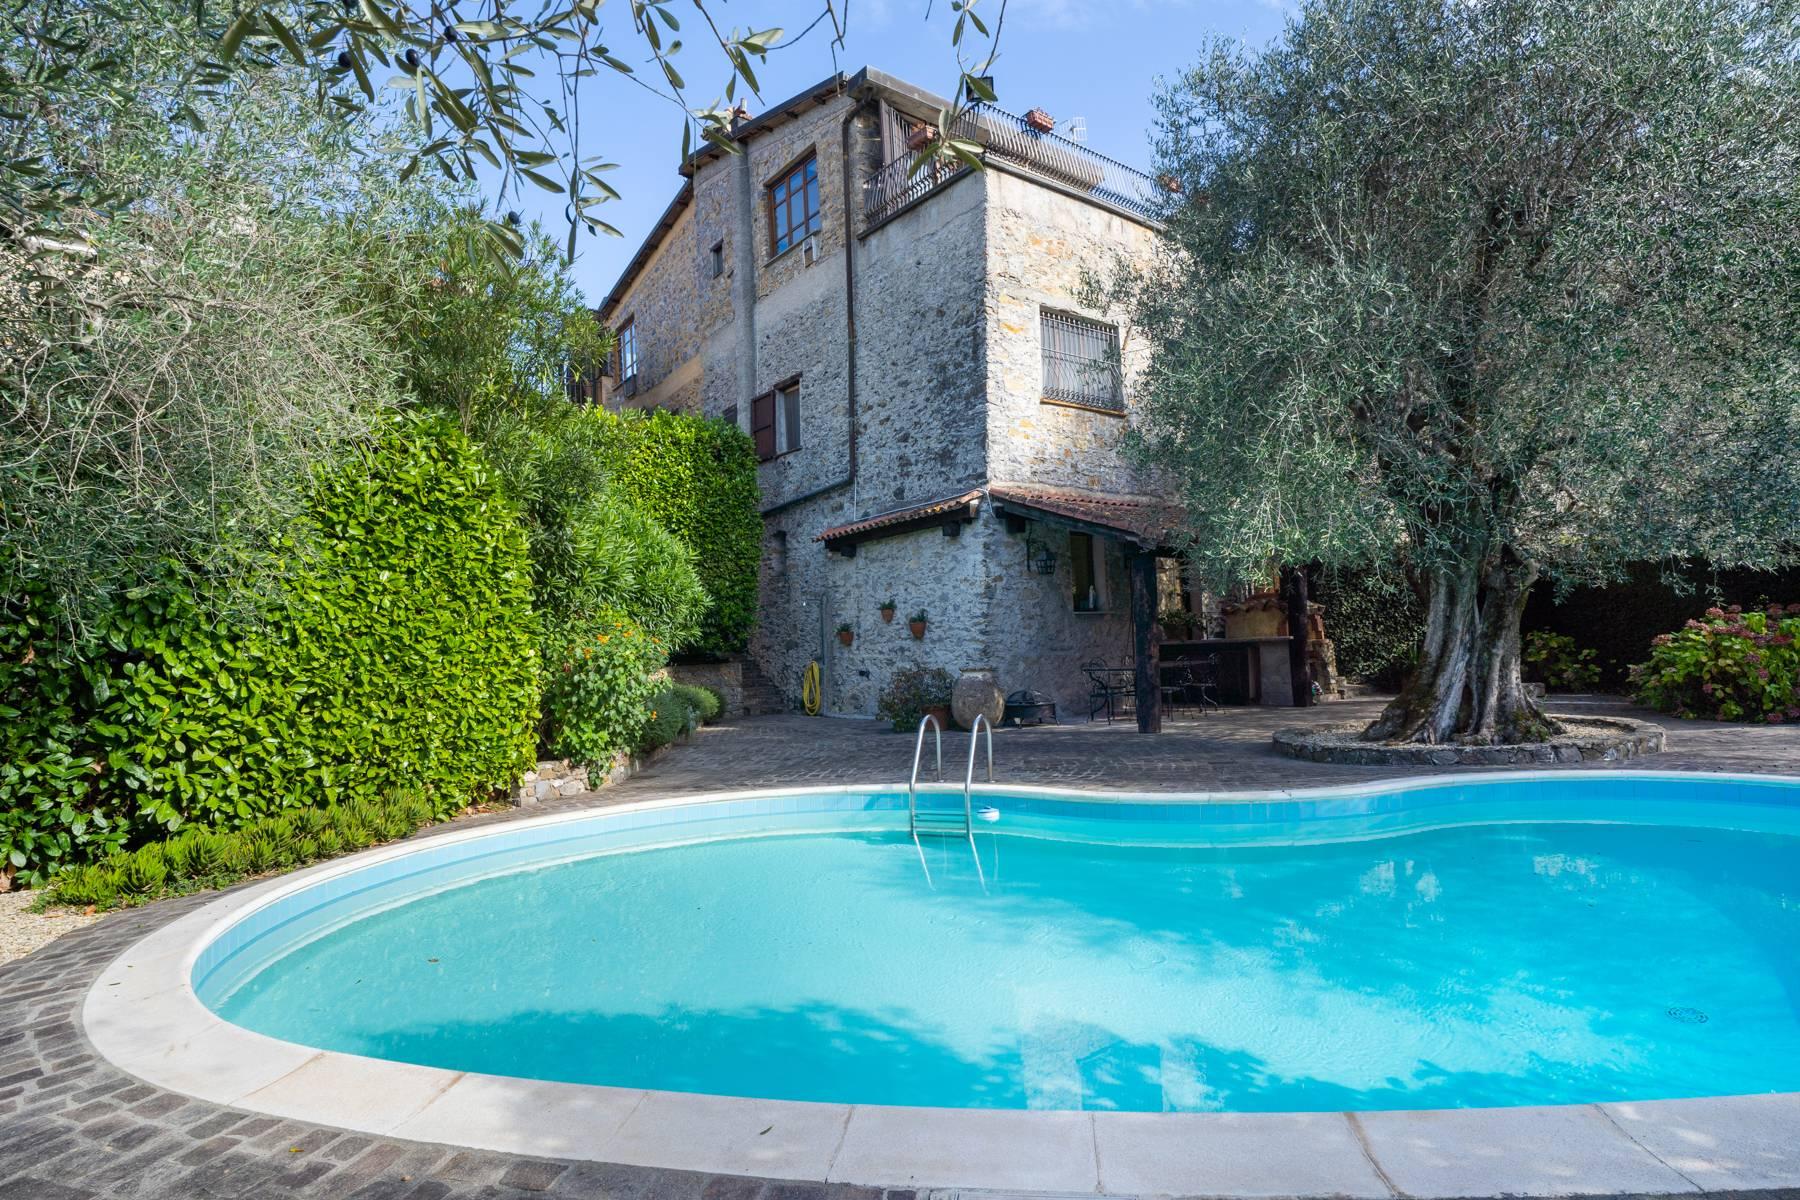 Enchanting Farmhouse with swimming pool in the village of Garlenda - 1